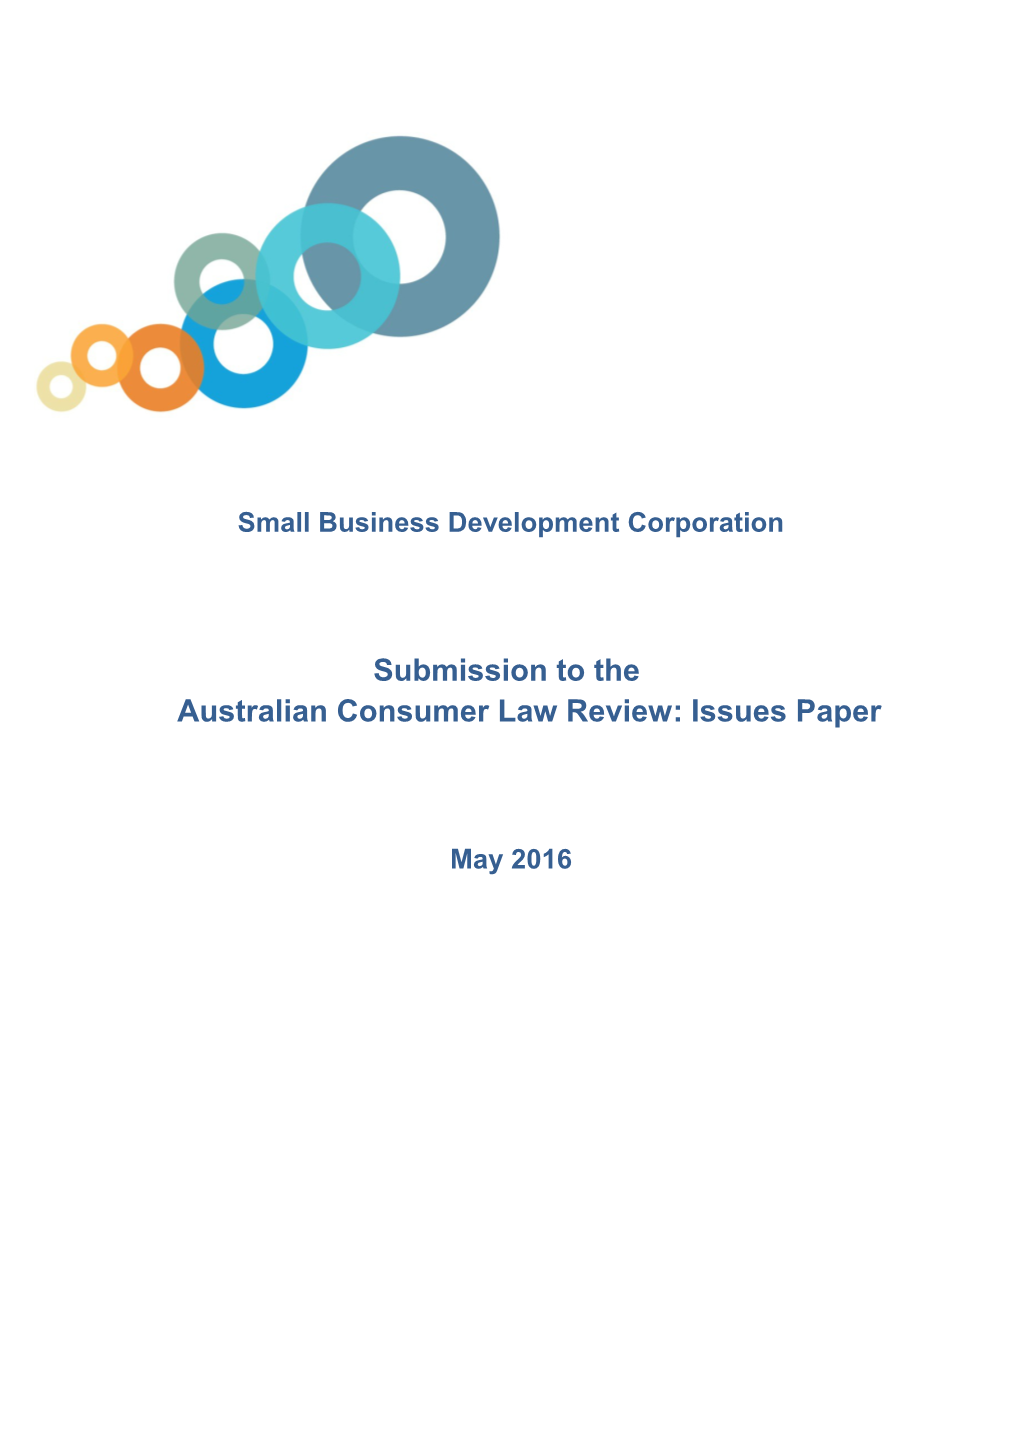 Submission to the Australian Consumer Law Review: Issues Paper